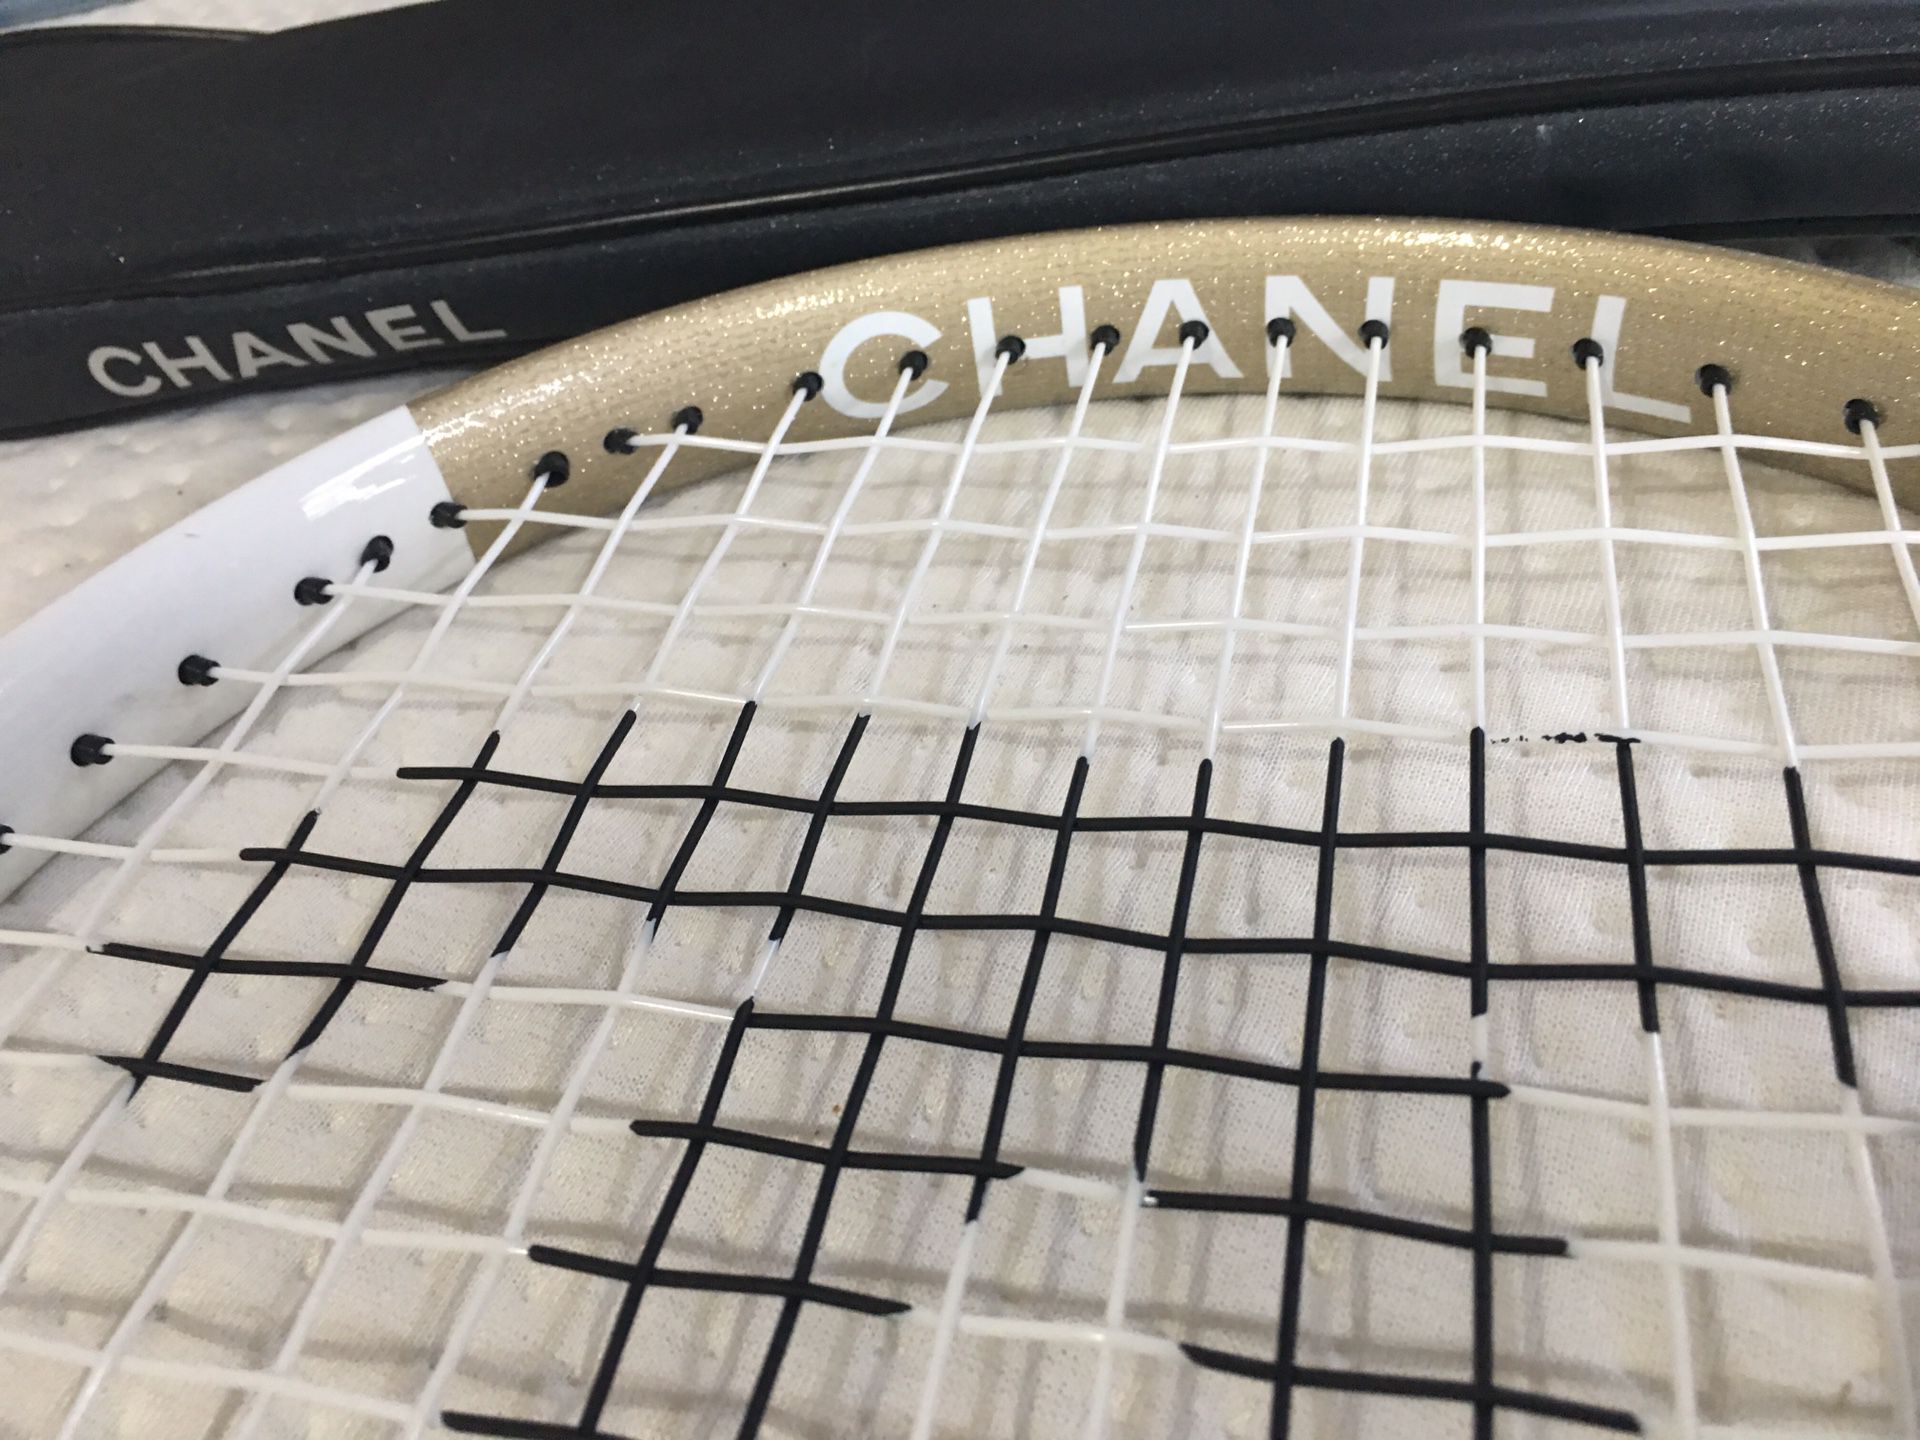 Chanel tennis racket set for Sale in Coral Gables, FL - OfferUp